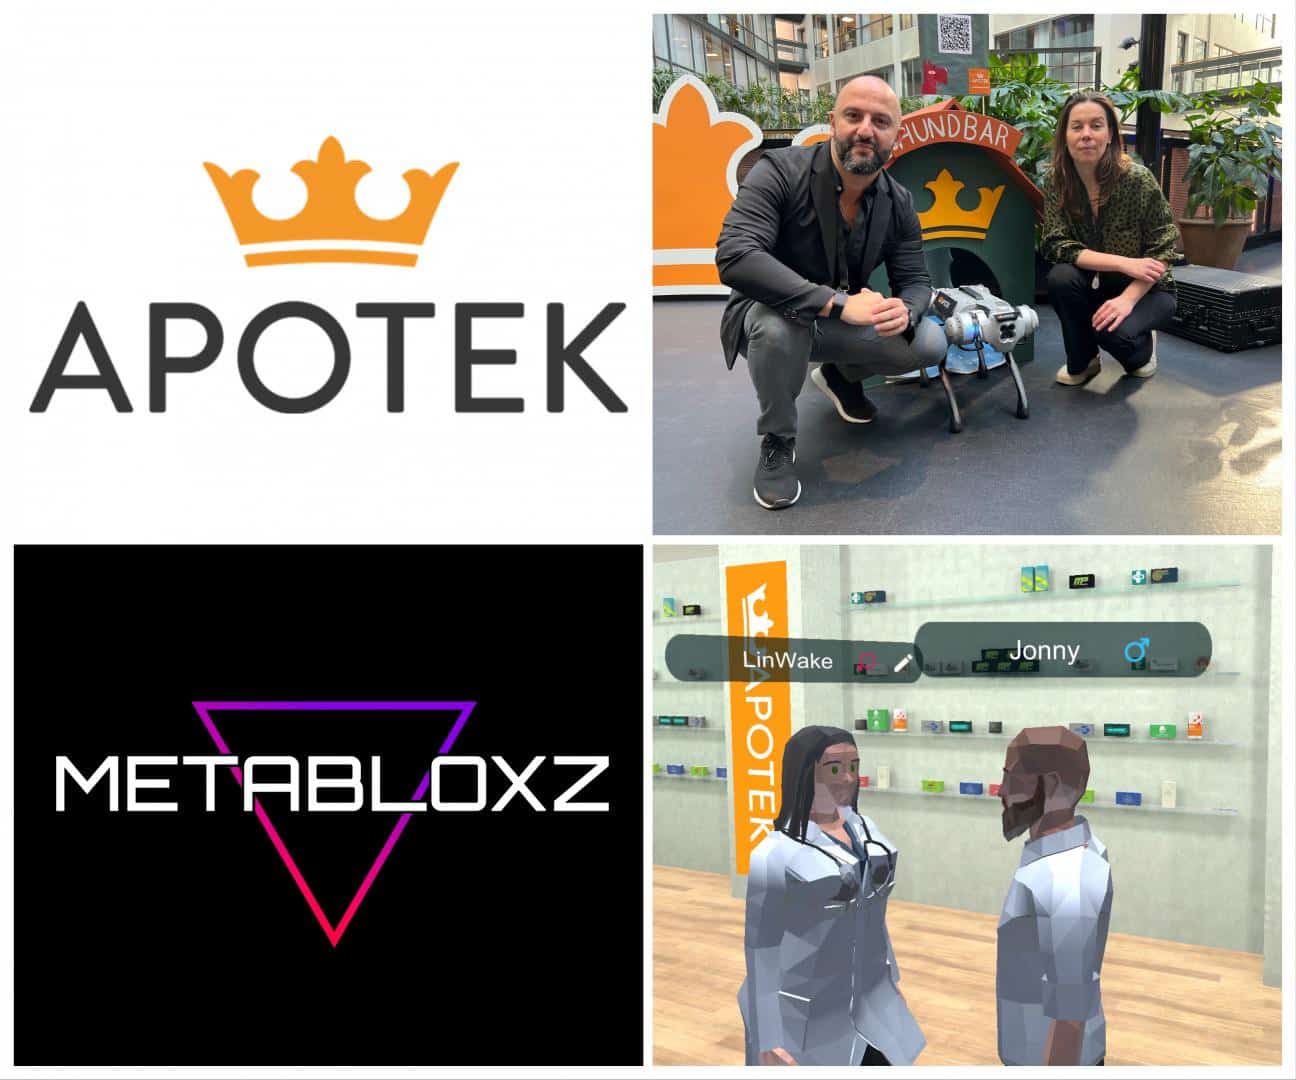 You are currently viewing Metabloxz Brings a Major Swedish Pharmacy Chain Into the Metaverse